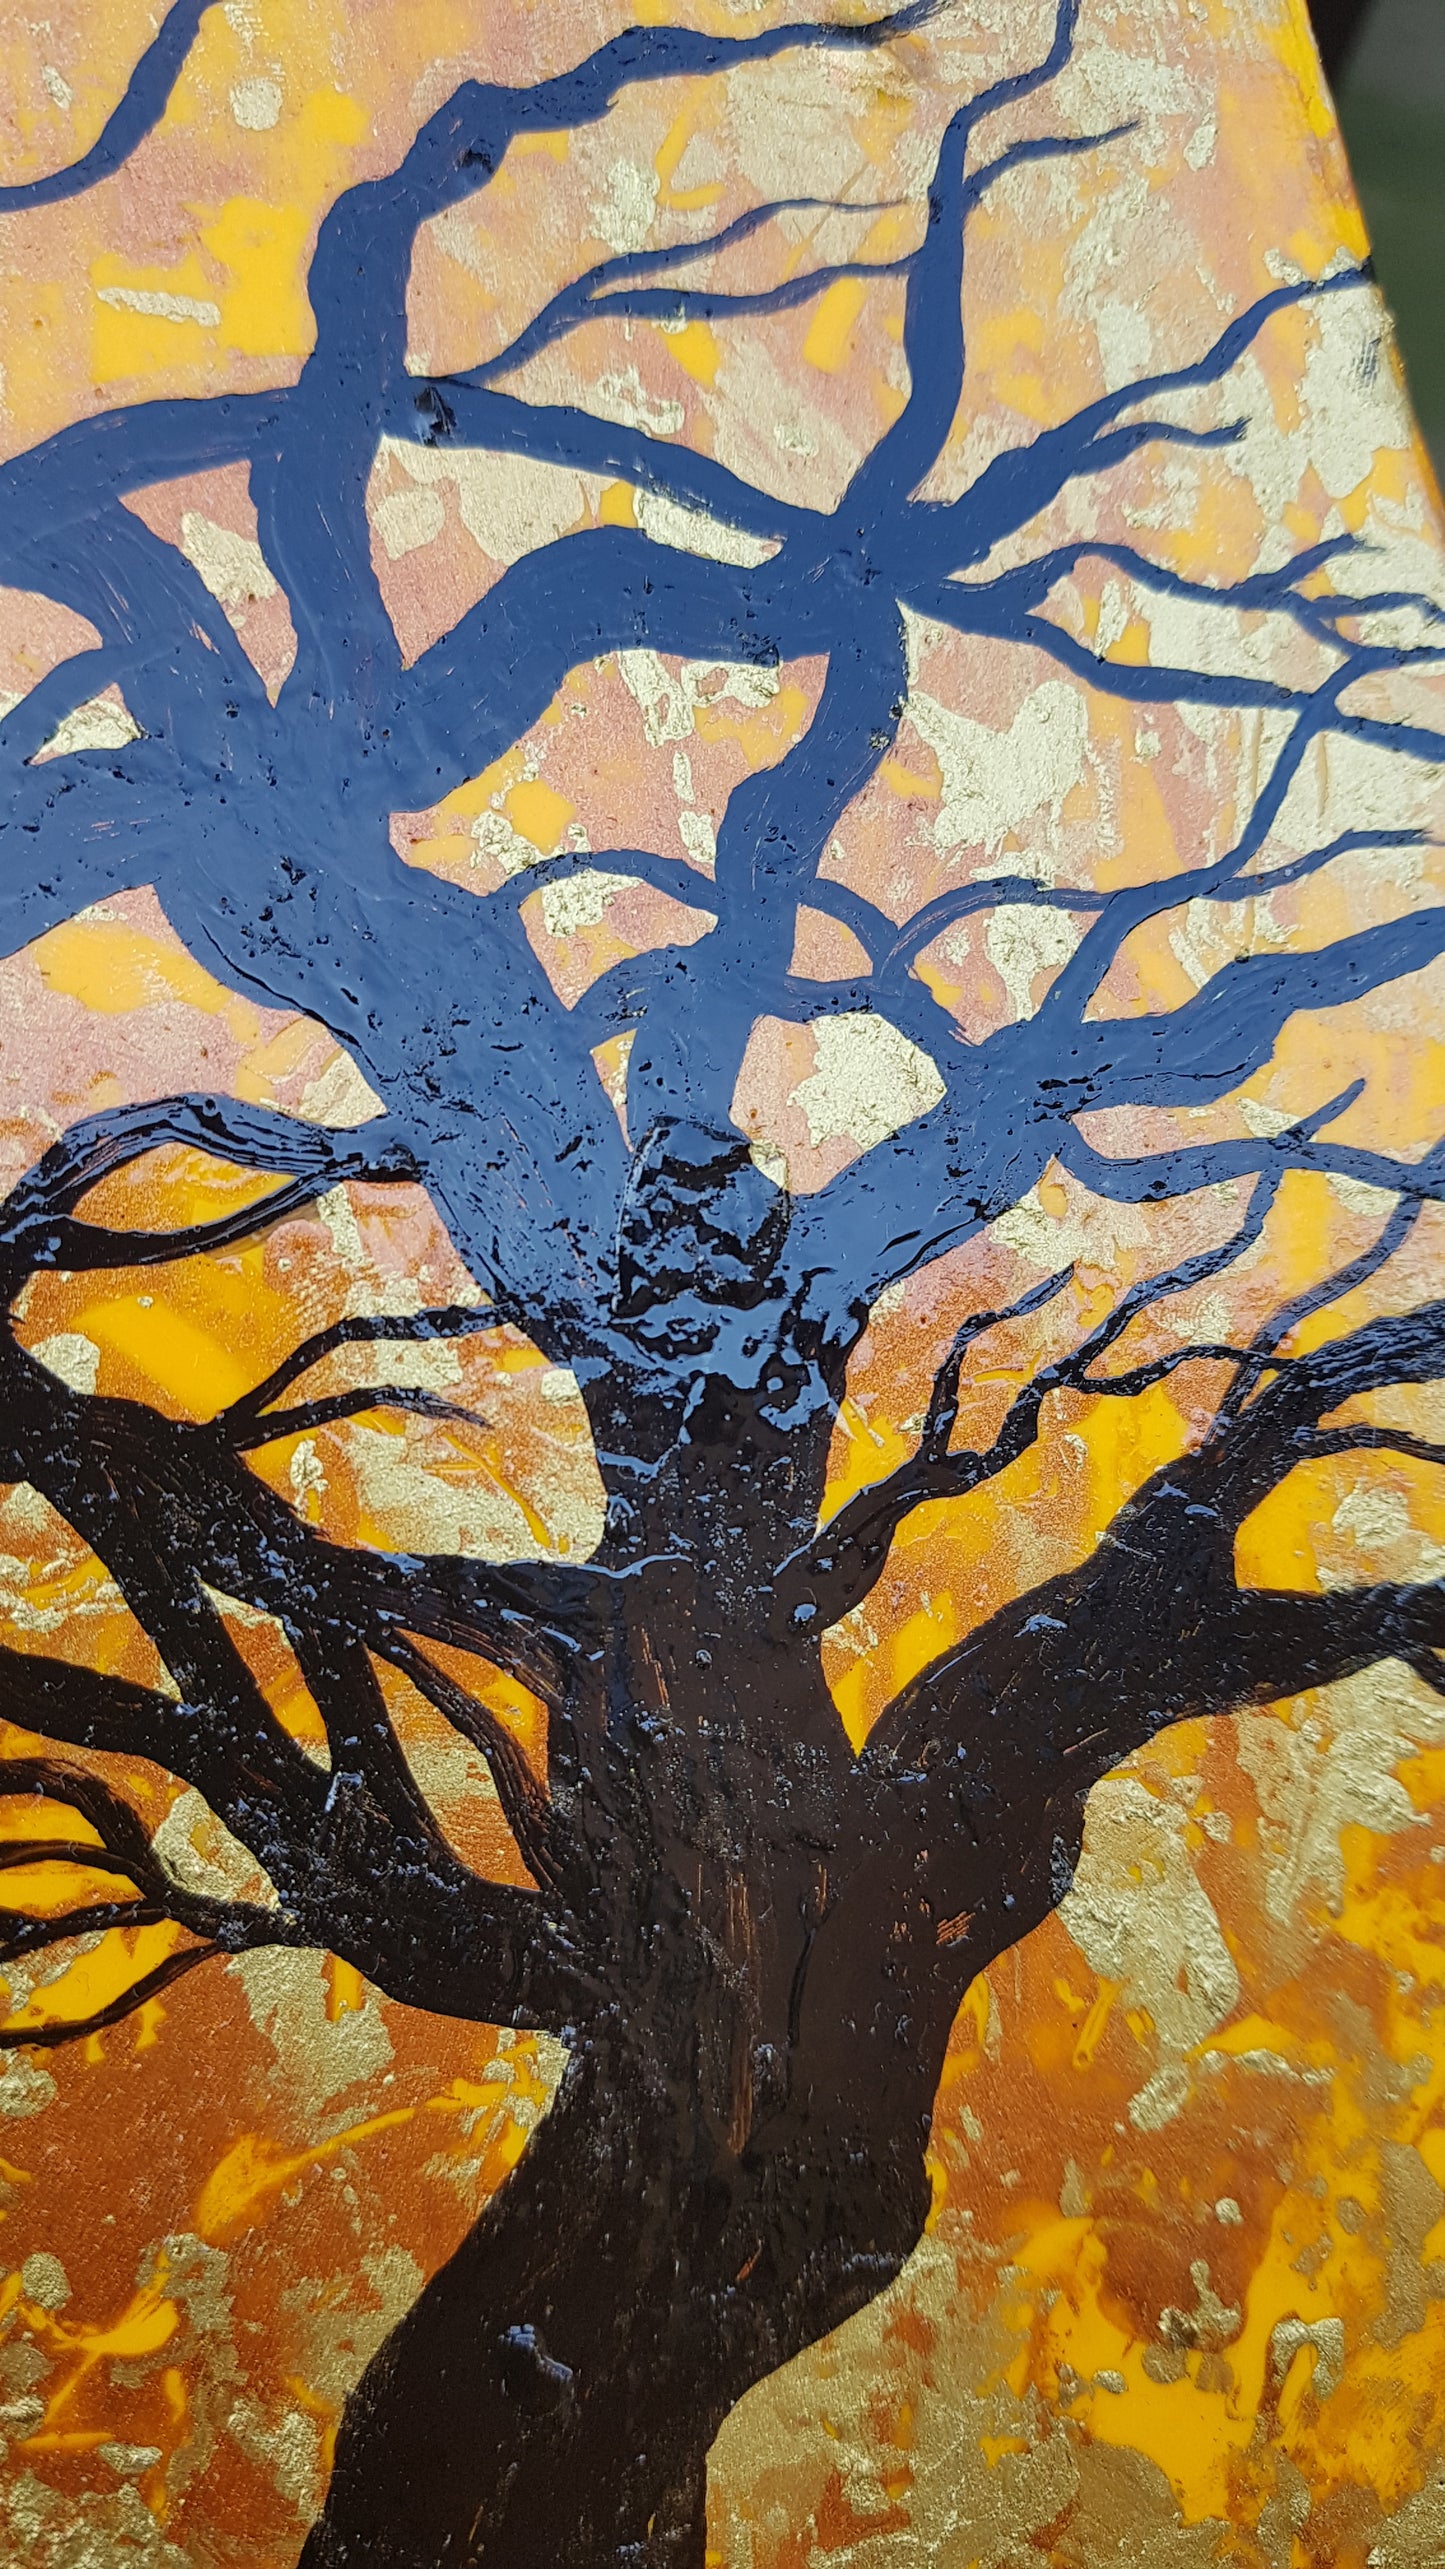 The-Root-of-Evil-by-Alexandra-Romano-Original-Amazing-Tree-Painting-Abstract-Expressionism-Impressionism-Artwork-Yellow-Gold-Black-Copper-Beautiful-Art-Gallery-In-Toronto-Canada-witch-tree-roots-black-branches